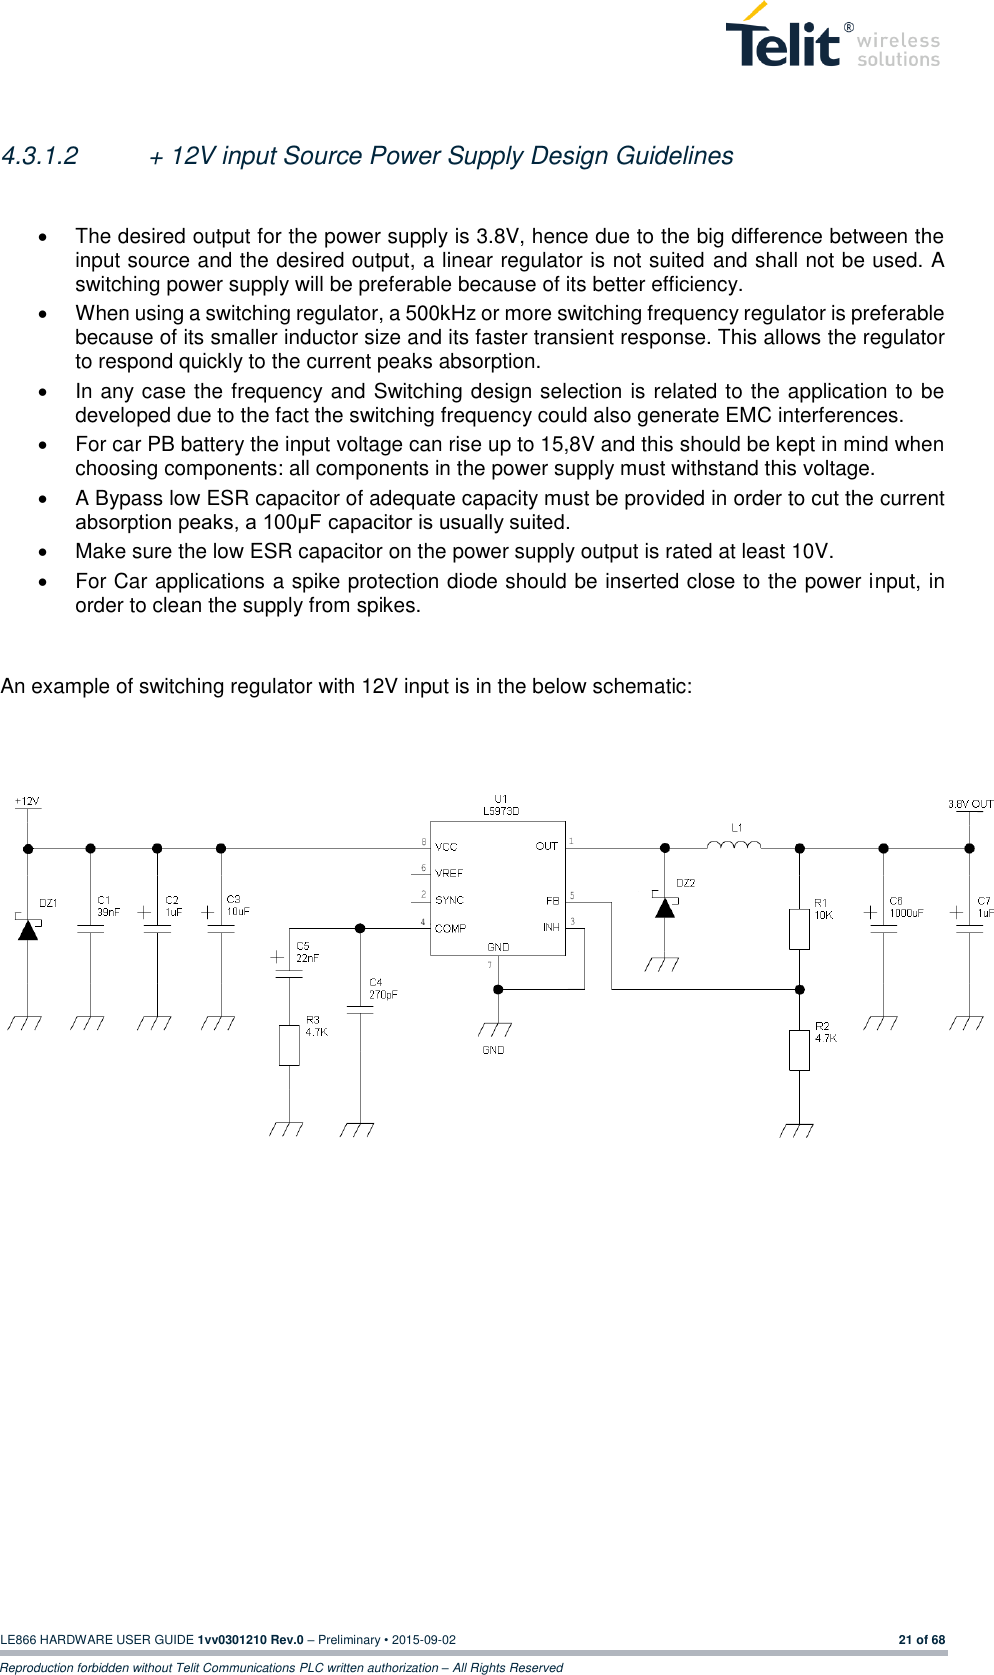  LE866 HARDWARE USER GUIDE 1vv0301210 Rev.0 – Preliminary • 2015-09-02 21 of 68 Reproduction forbidden without Telit Communications PLC written authorization – All Rights Reserved  4.3.1.2  + 12V input Source Power Supply Design Guidelines    The desired output for the power supply is 3.8V, hence due to the big difference between the input source and the desired output, a linear regulator is not suited and shall not be used. A switching power supply will be preferable because of its better efficiency.   When using a switching regulator, a 500kHz or more switching frequency regulator is preferable because of its smaller inductor size and its faster transient response. This allows the regulator to respond quickly to the current peaks absorption.    In any case the frequency and Switching design selection is related to the application to be developed due to the fact the switching frequency could also generate EMC interferences.   For car PB battery the input voltage can rise up to 15,8V and this should be kept in mind when choosing components: all components in the power supply must withstand this voltage.   A Bypass low ESR capacitor of adequate capacity must be provided in order to cut the current absorption peaks, a 100μF capacitor is usually suited.   Make sure the low ESR capacitor on the power supply output is rated at least 10V.   For Car applications a spike protection diode should be inserted close to the power input, in order to clean the supply from spikes.    An example of switching regulator with 12V input is in the below schematic:        